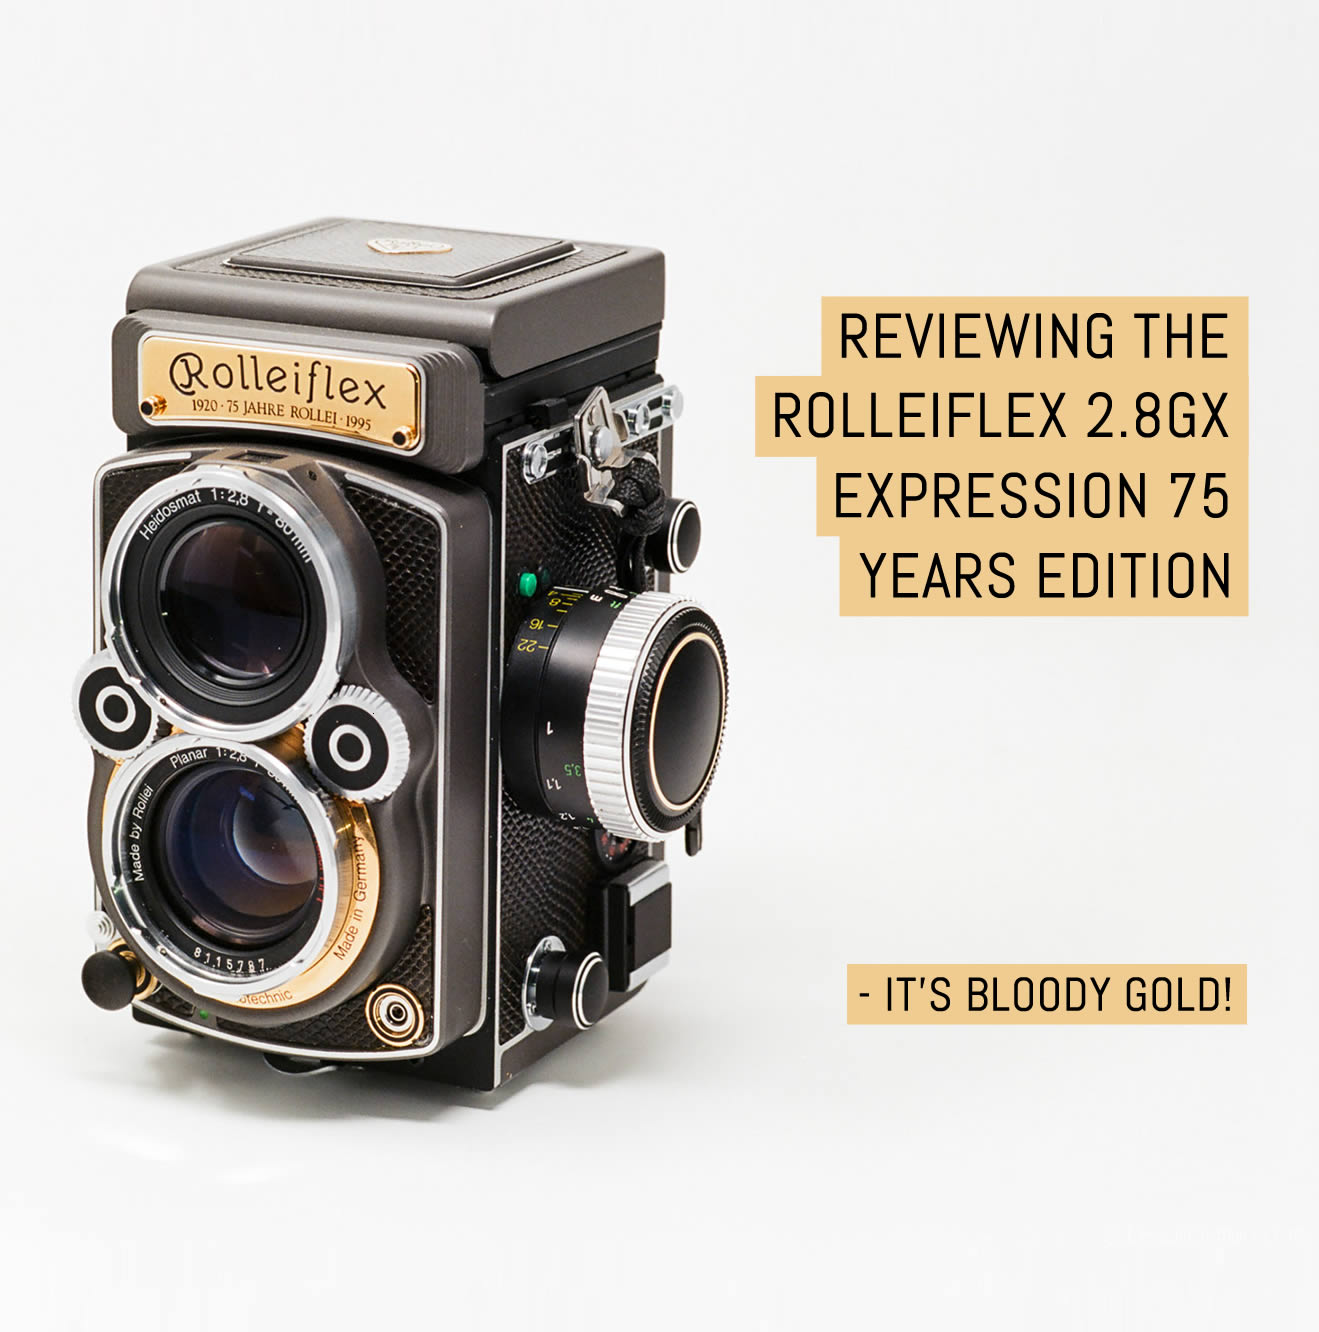 Reviewing the Rolleiflex 2.8GX Expression 75 years edition (it’s gold!)